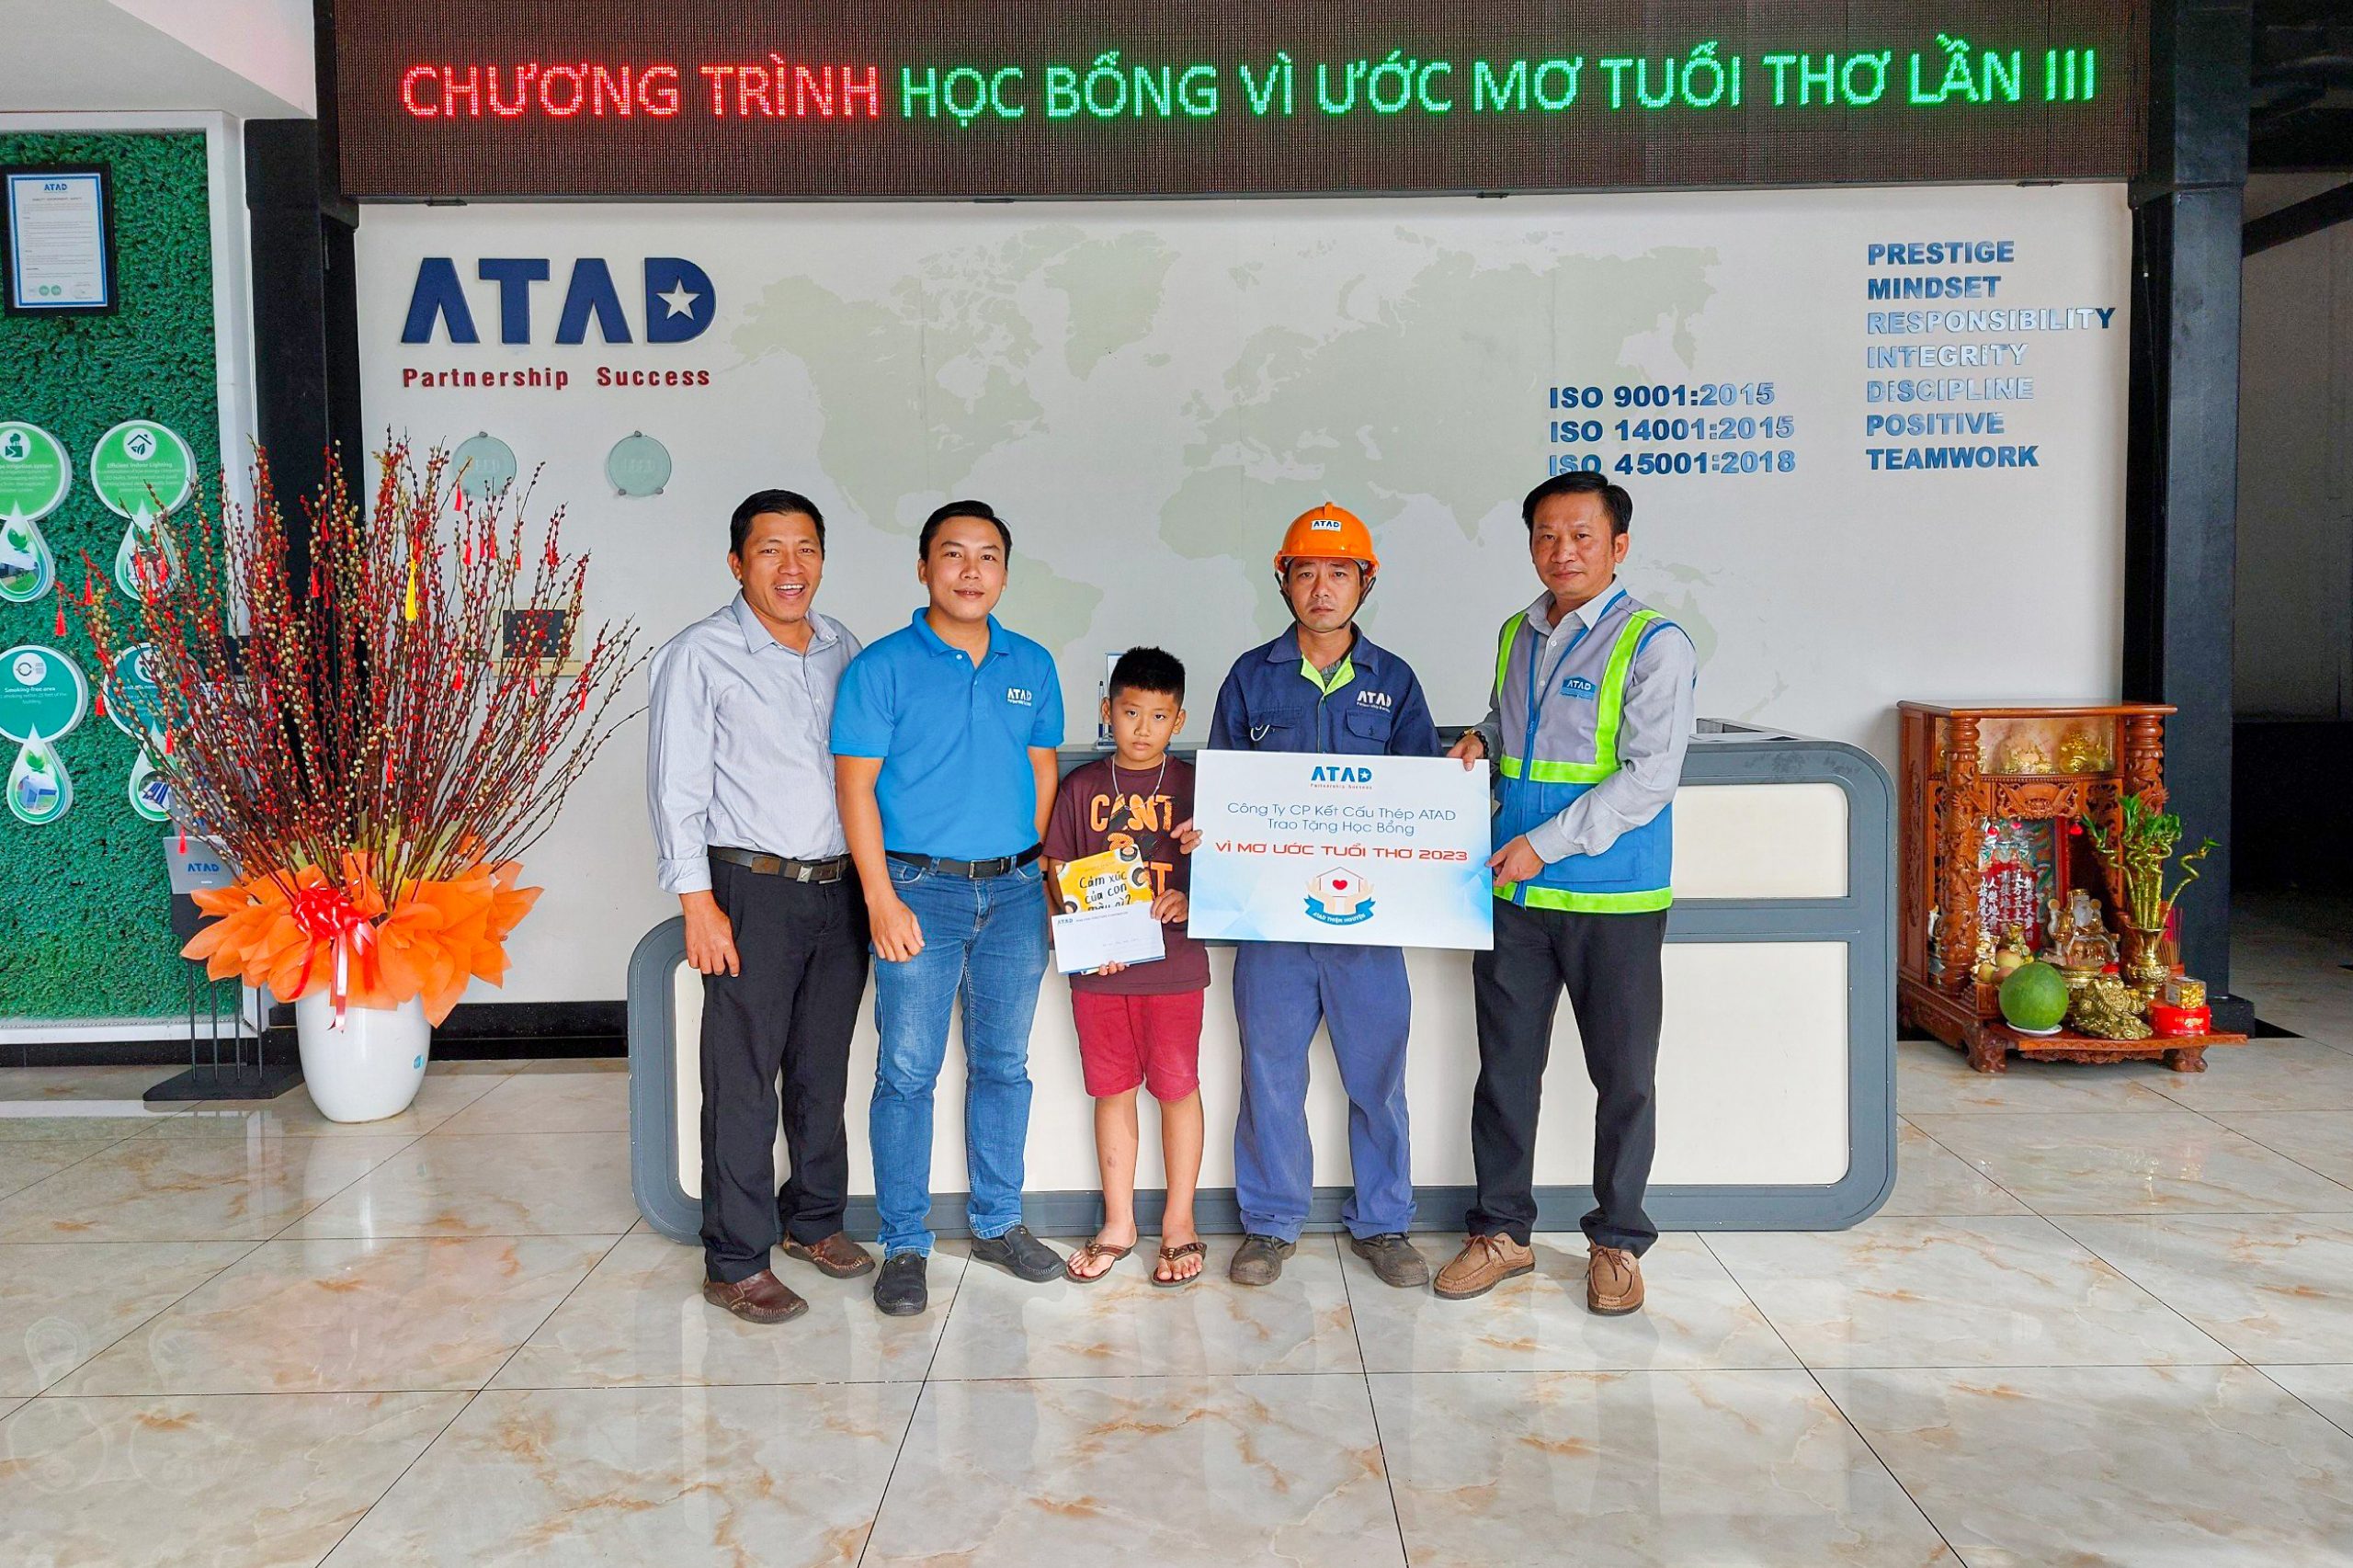 Presented Scholarships to Employees' Children in Need at ATAD Factories